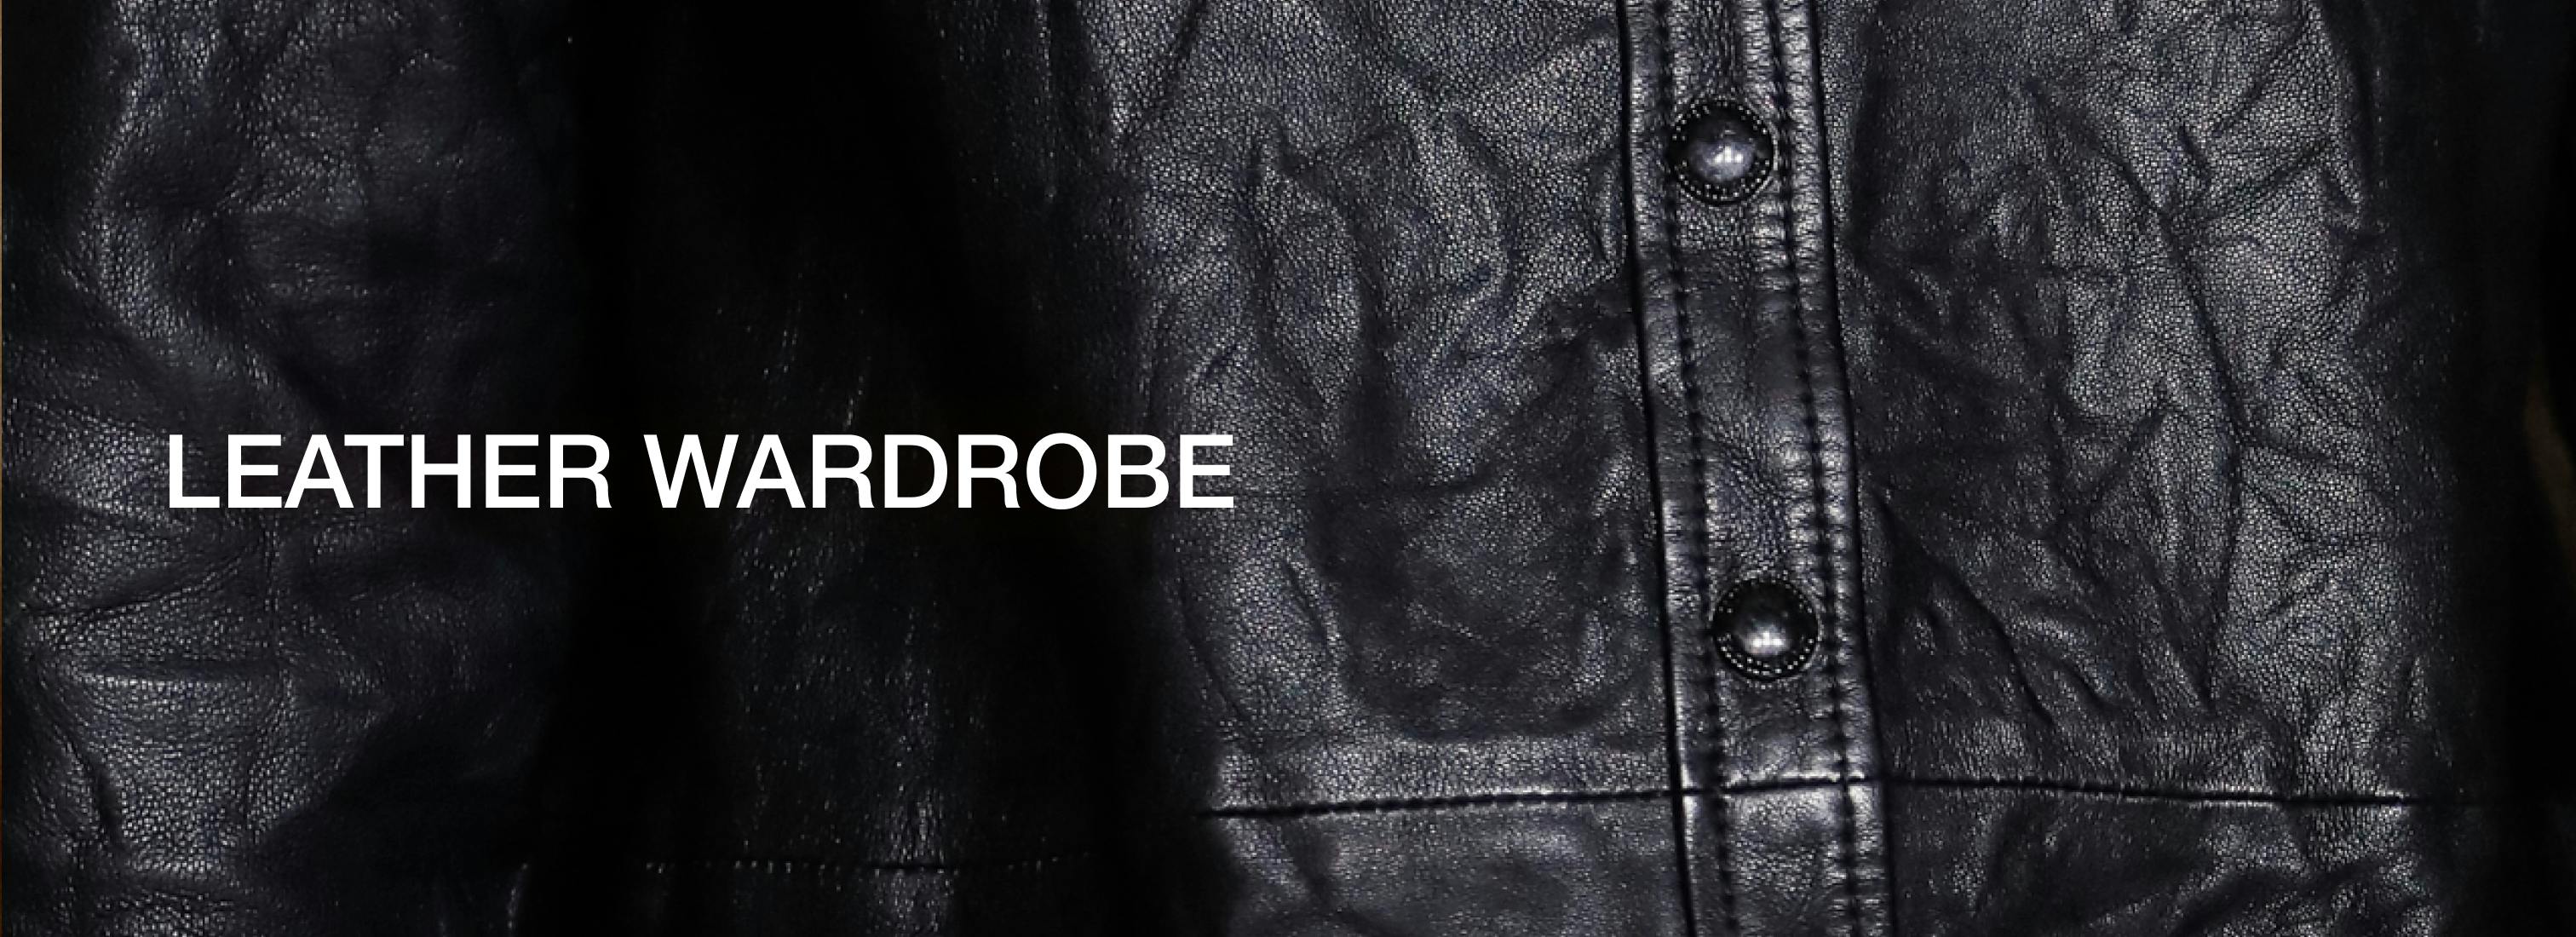 Women's leather clothing : jackets, pants, dresses... | Zadig&Voltaire